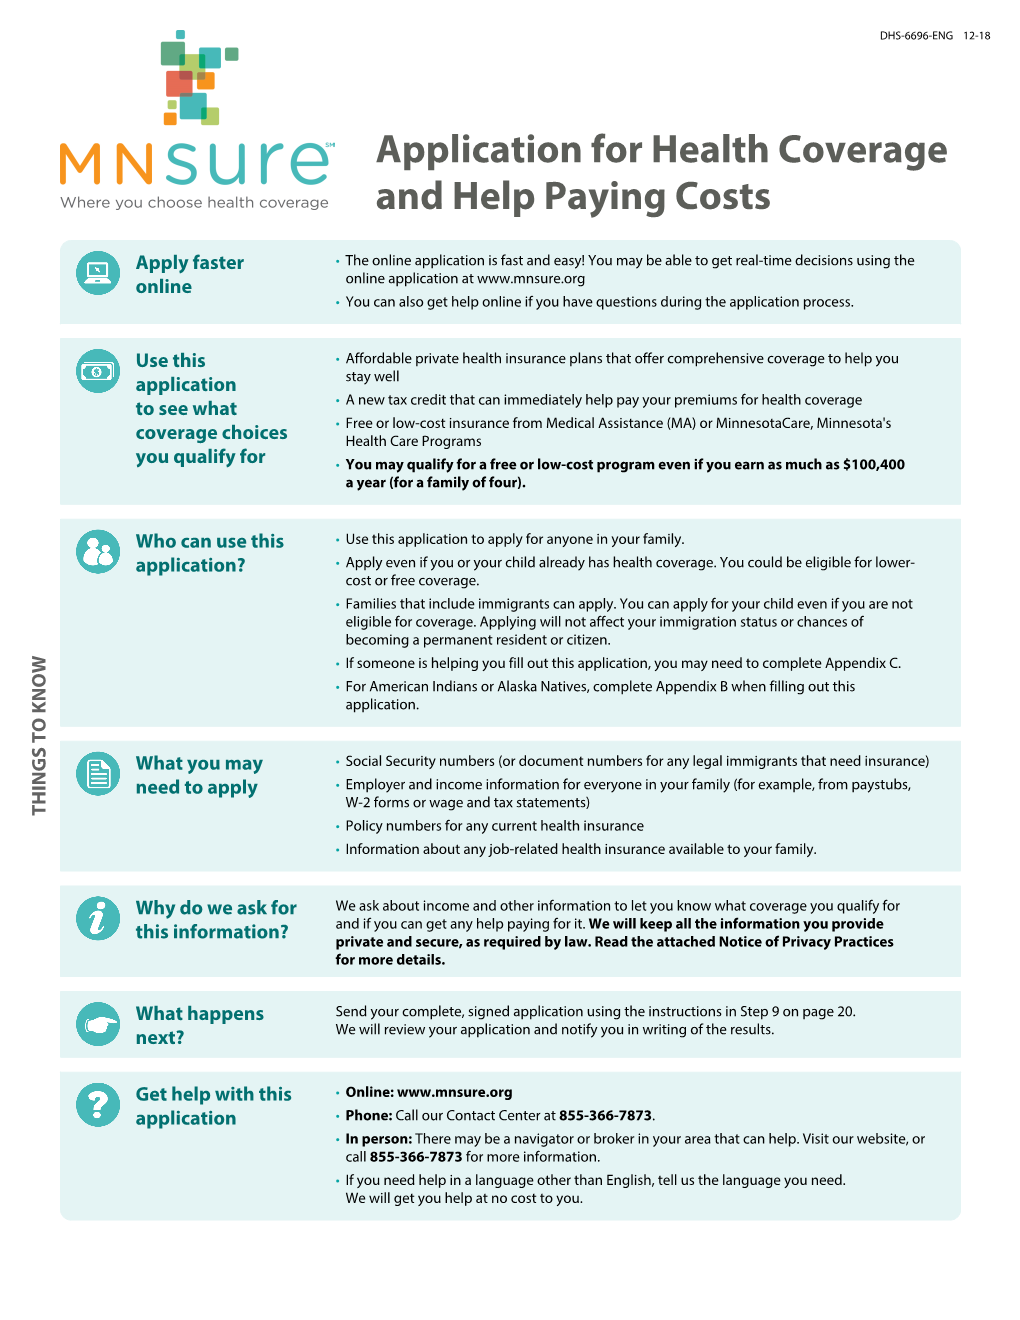 Mnsure Application for Health Coverage and Help Paying Costs